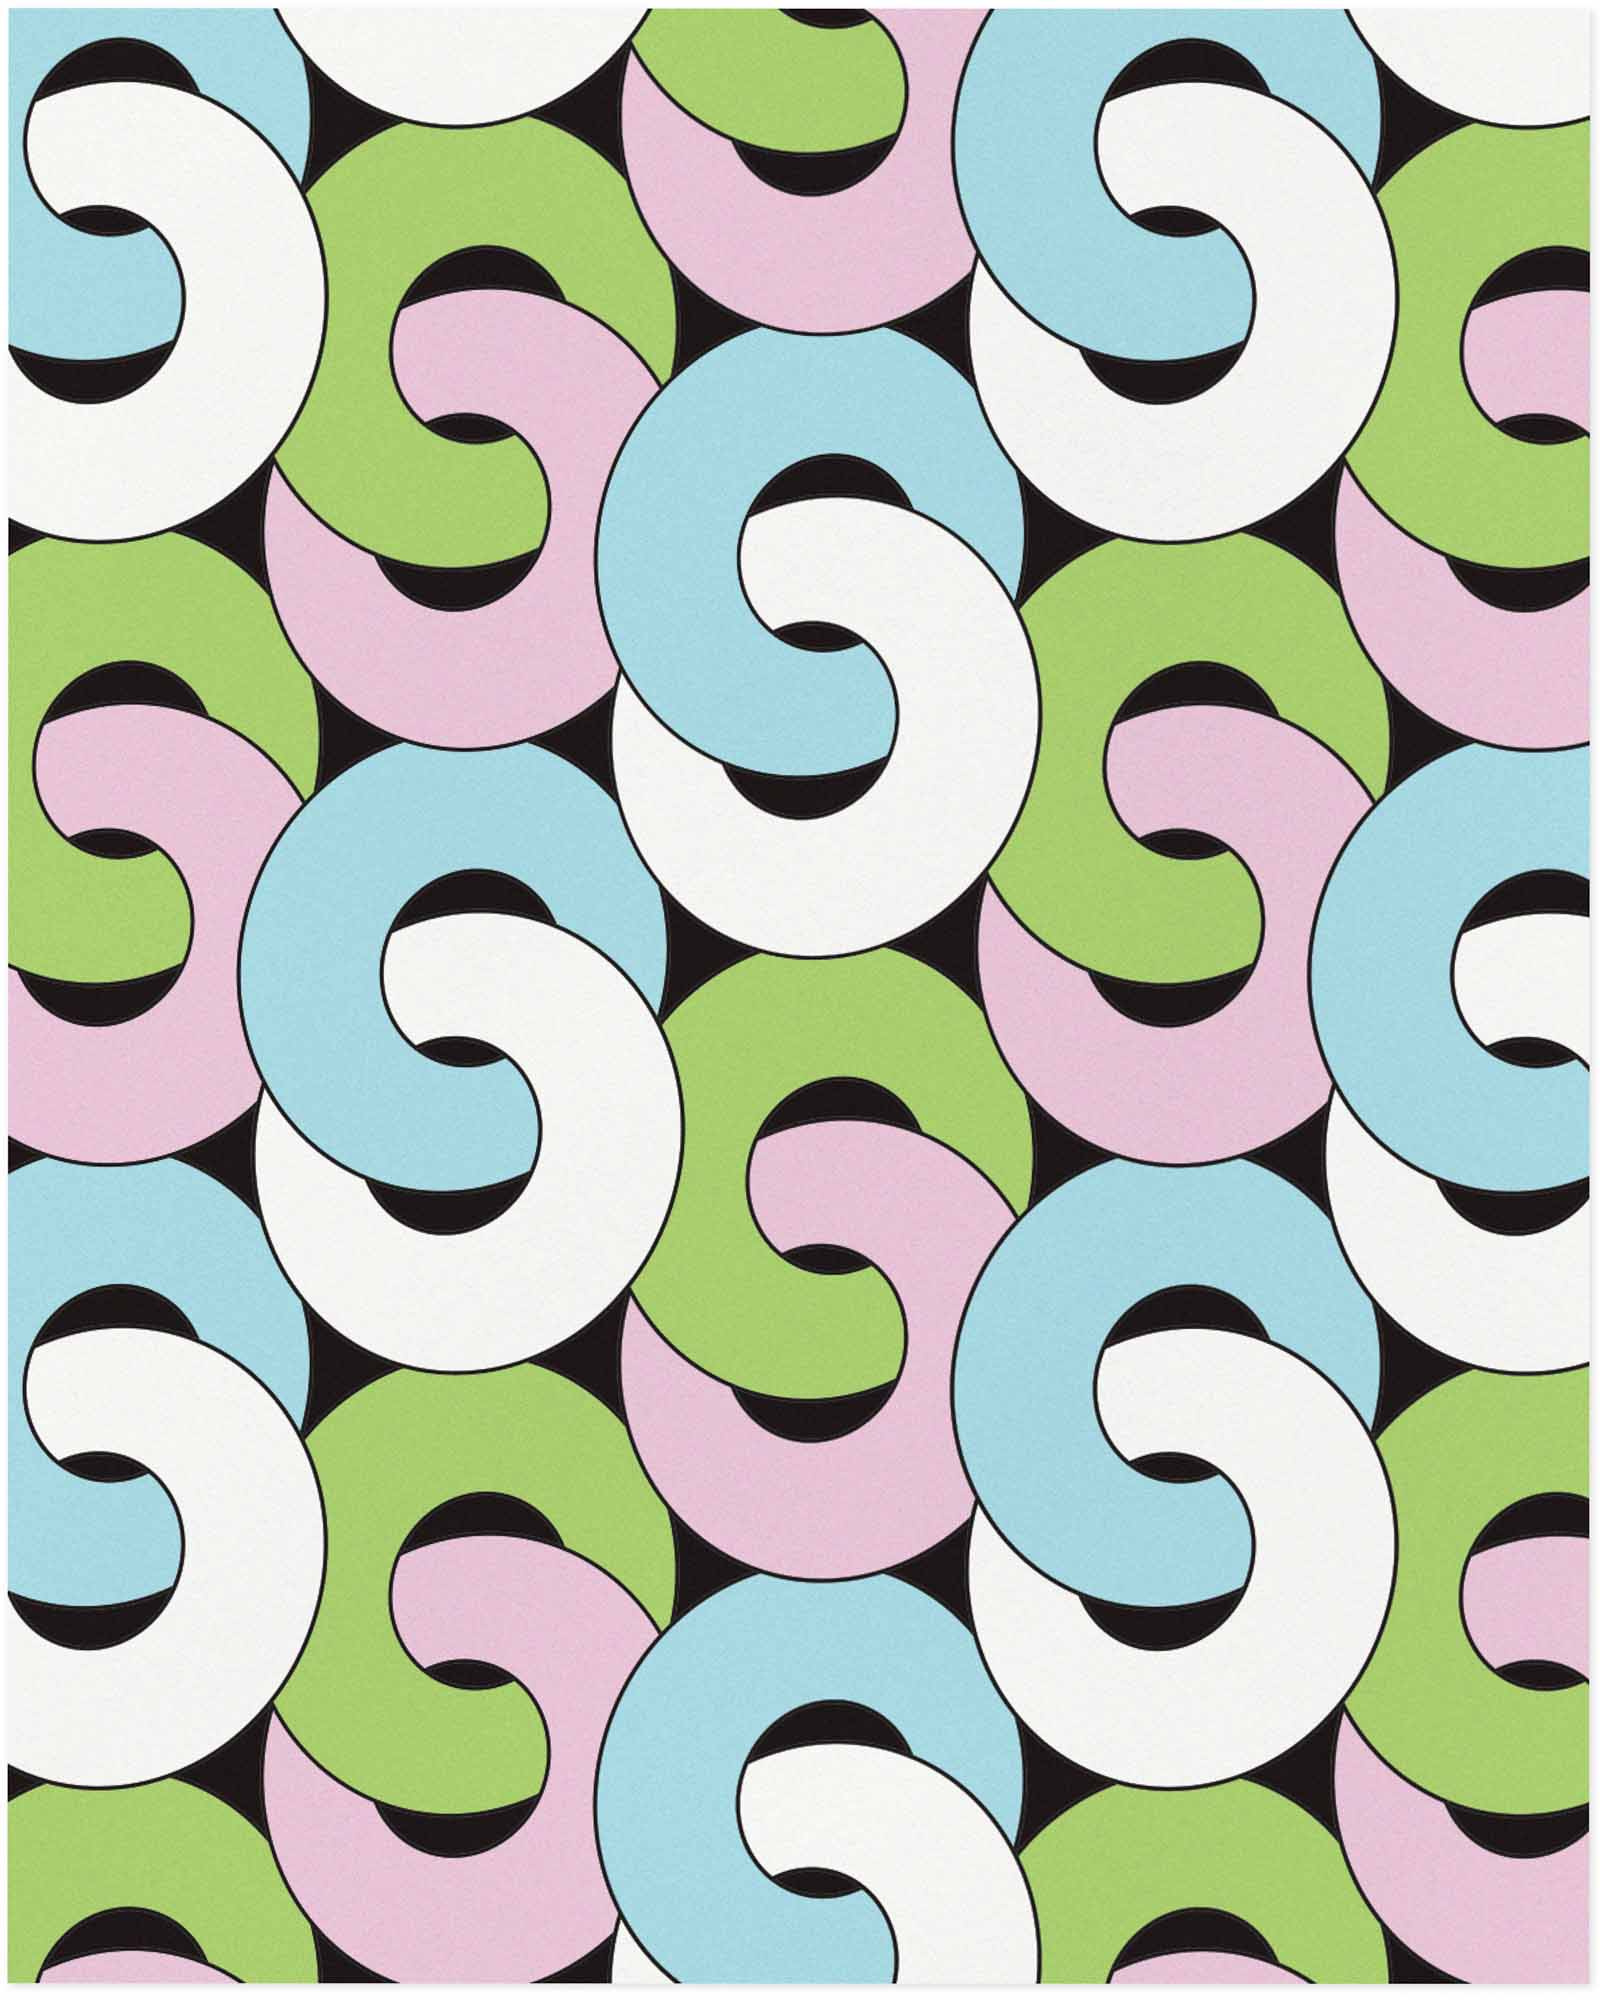 Mod linked rings archival giclée graphic art print. Made in USA by My Darlin' @mydarlin_bk